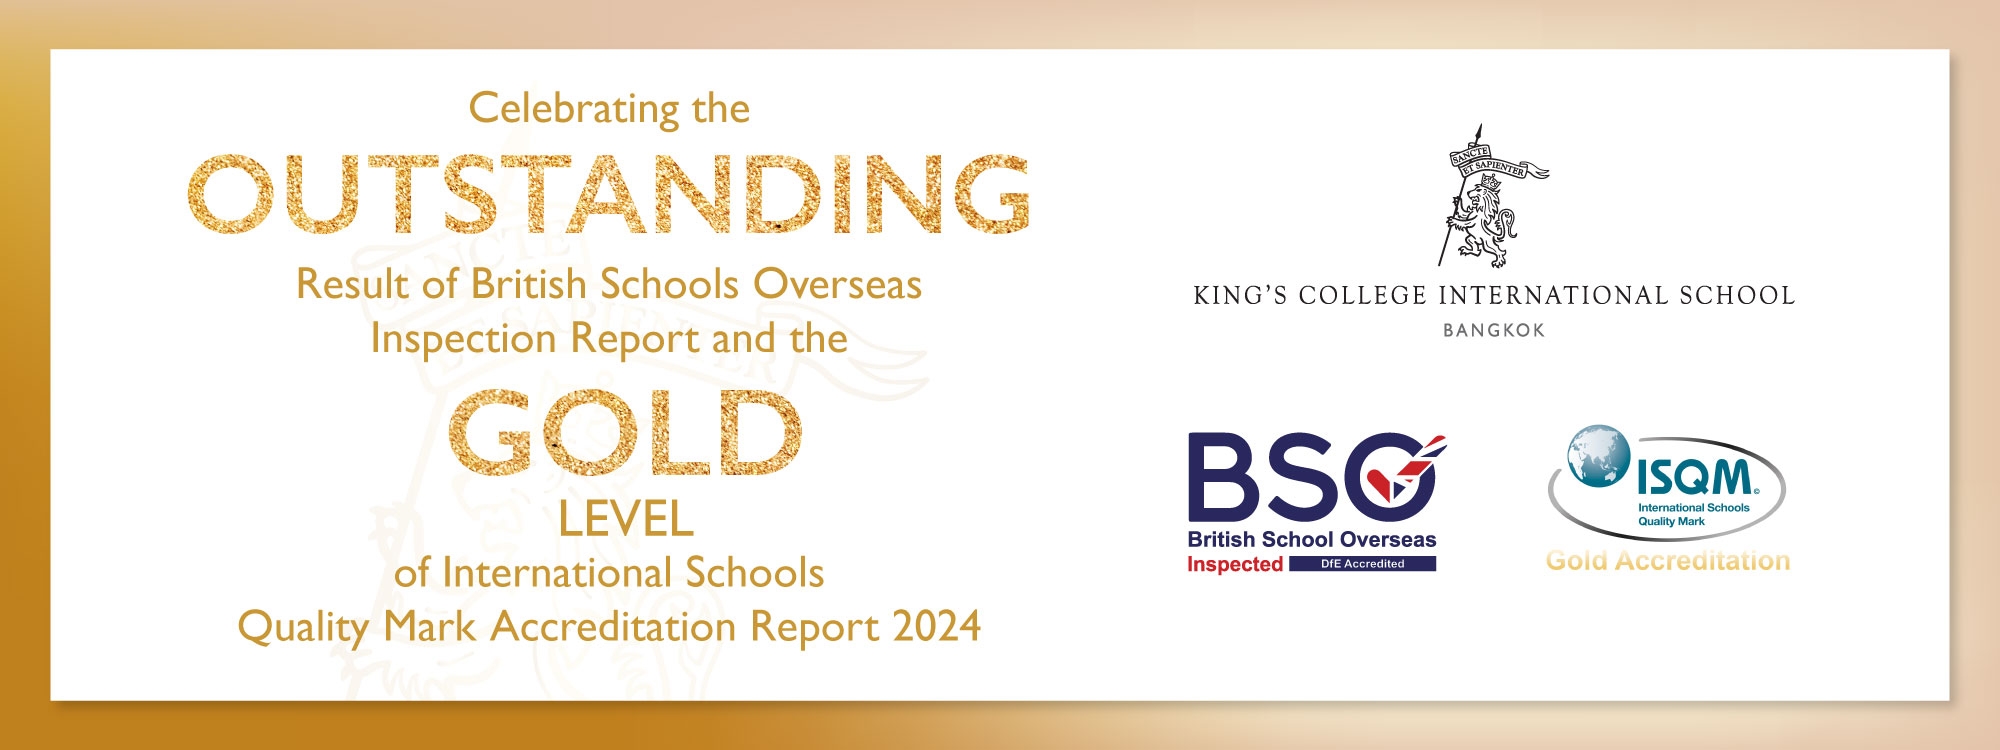 Our Outstanding result in the British Schools Overseas inspection accreditation and Gold level for the International Schools Quality Mark 2024